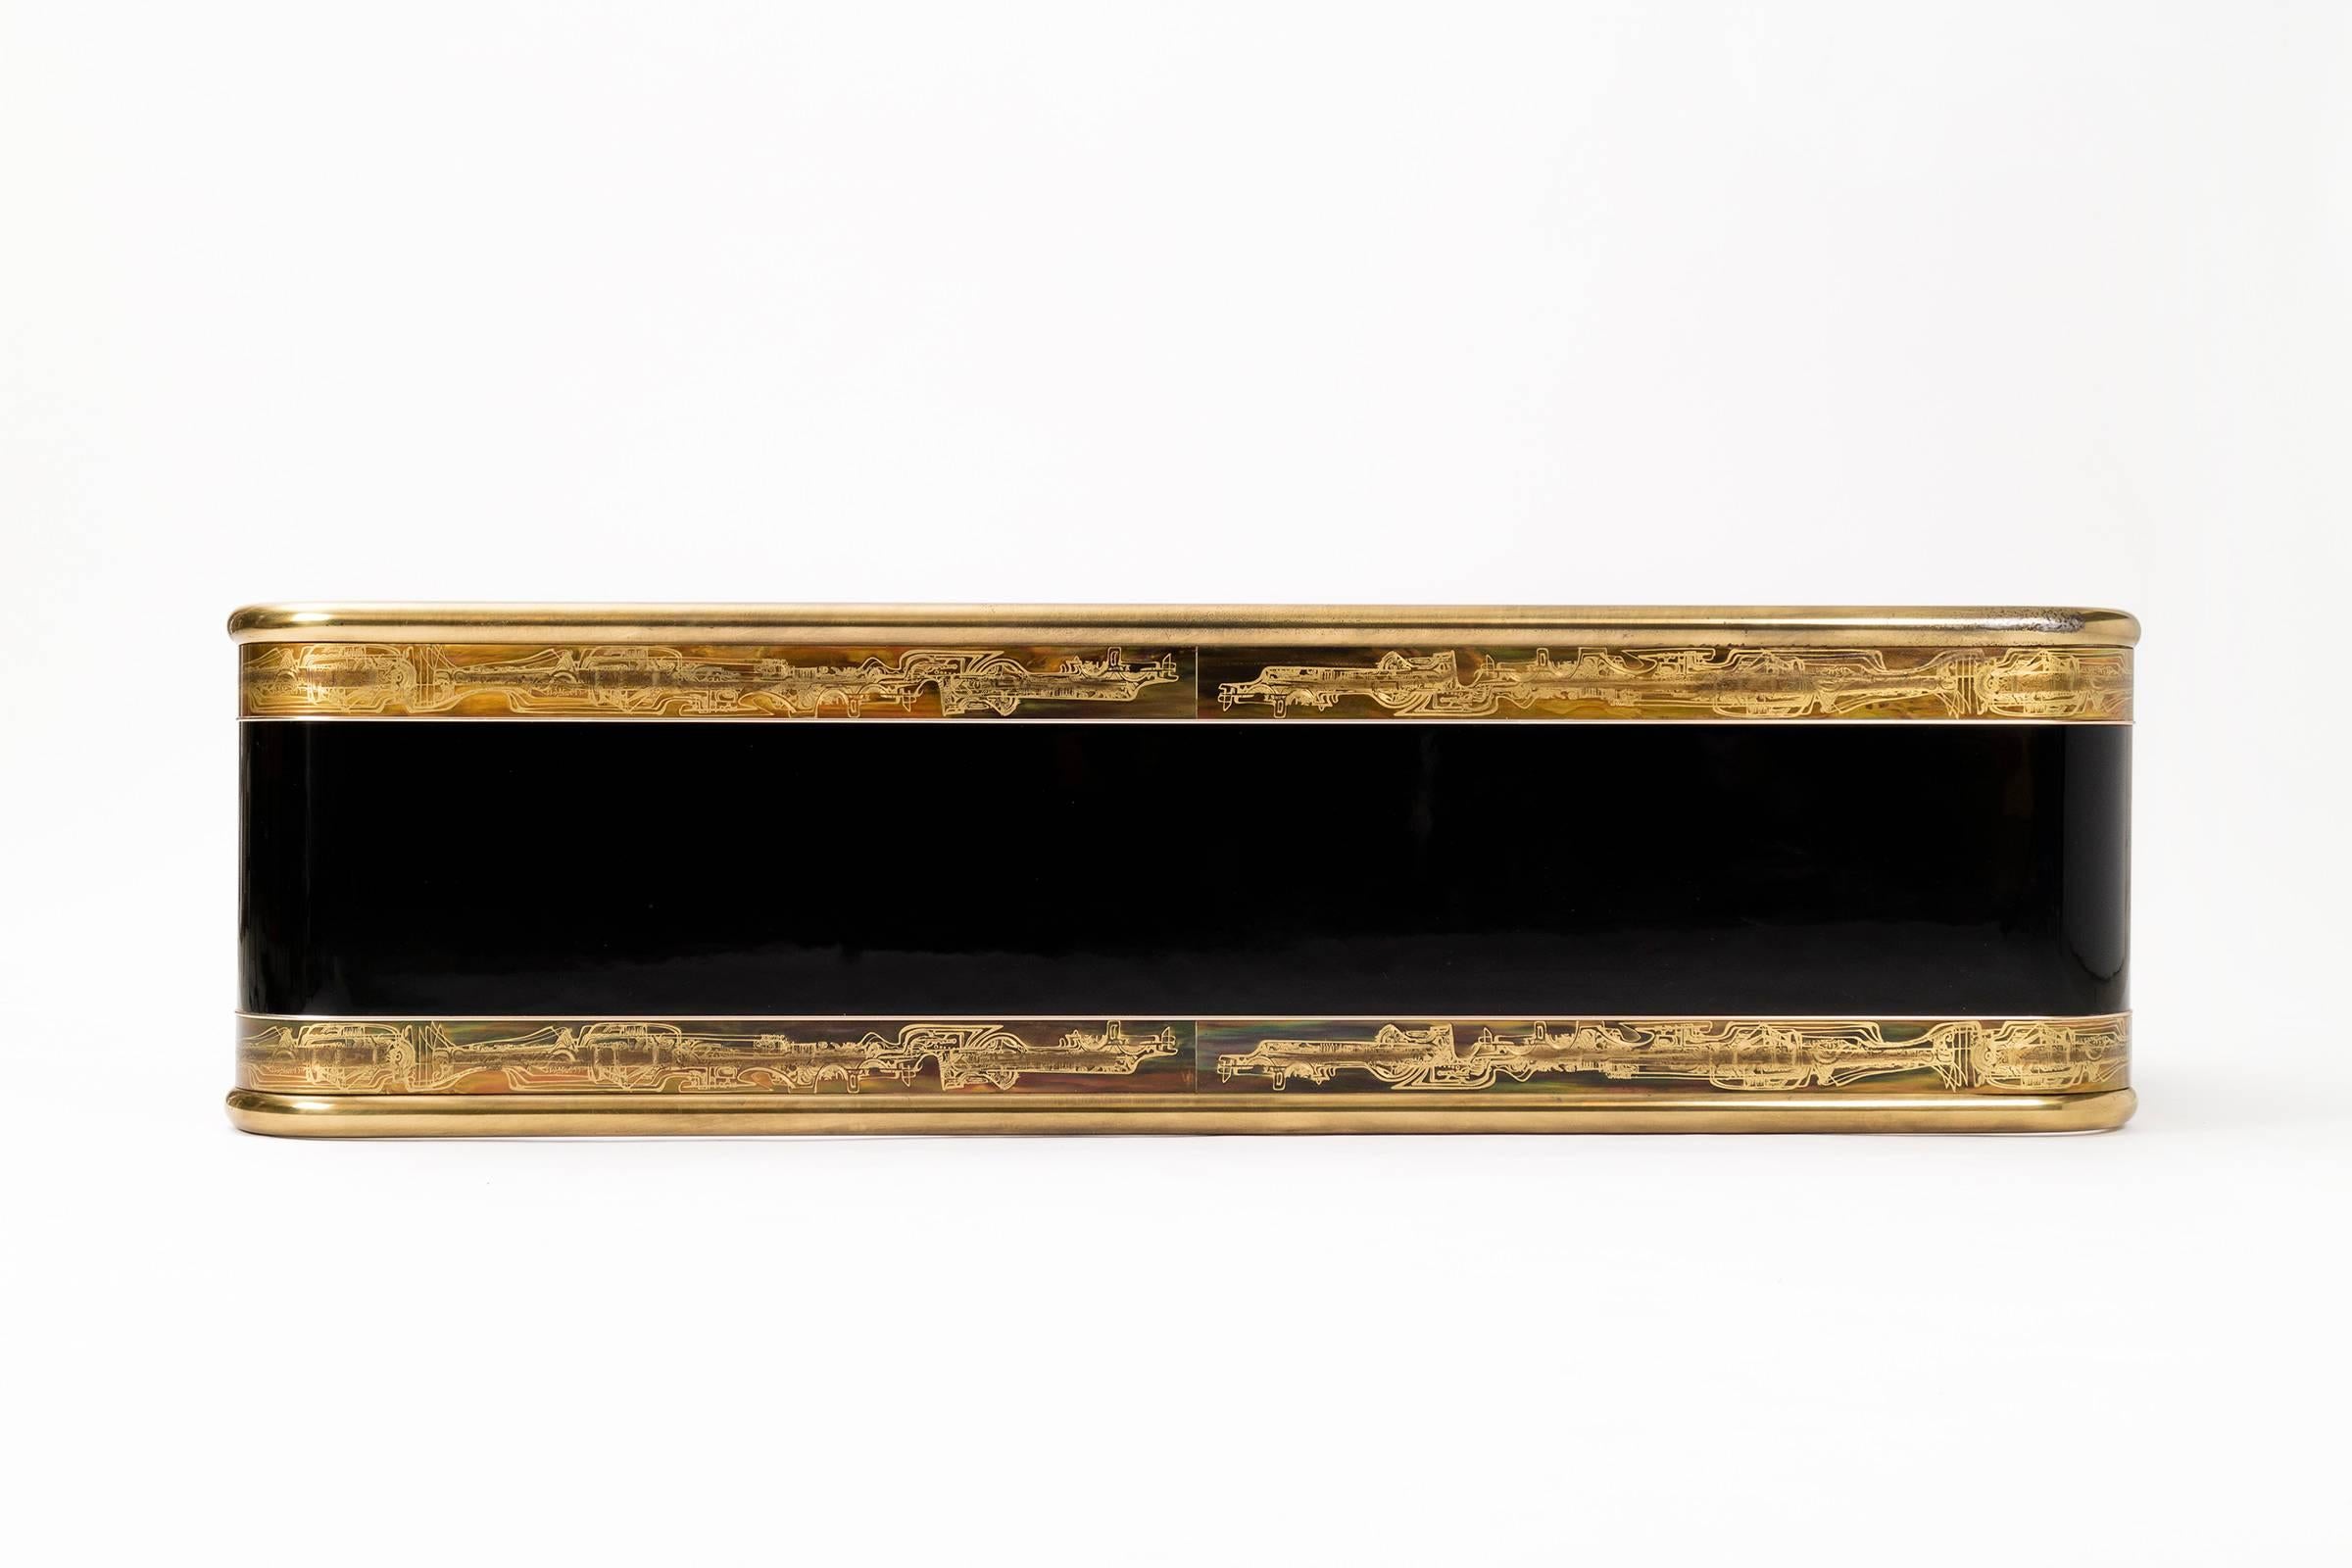 Etched Mastercraft Console Table